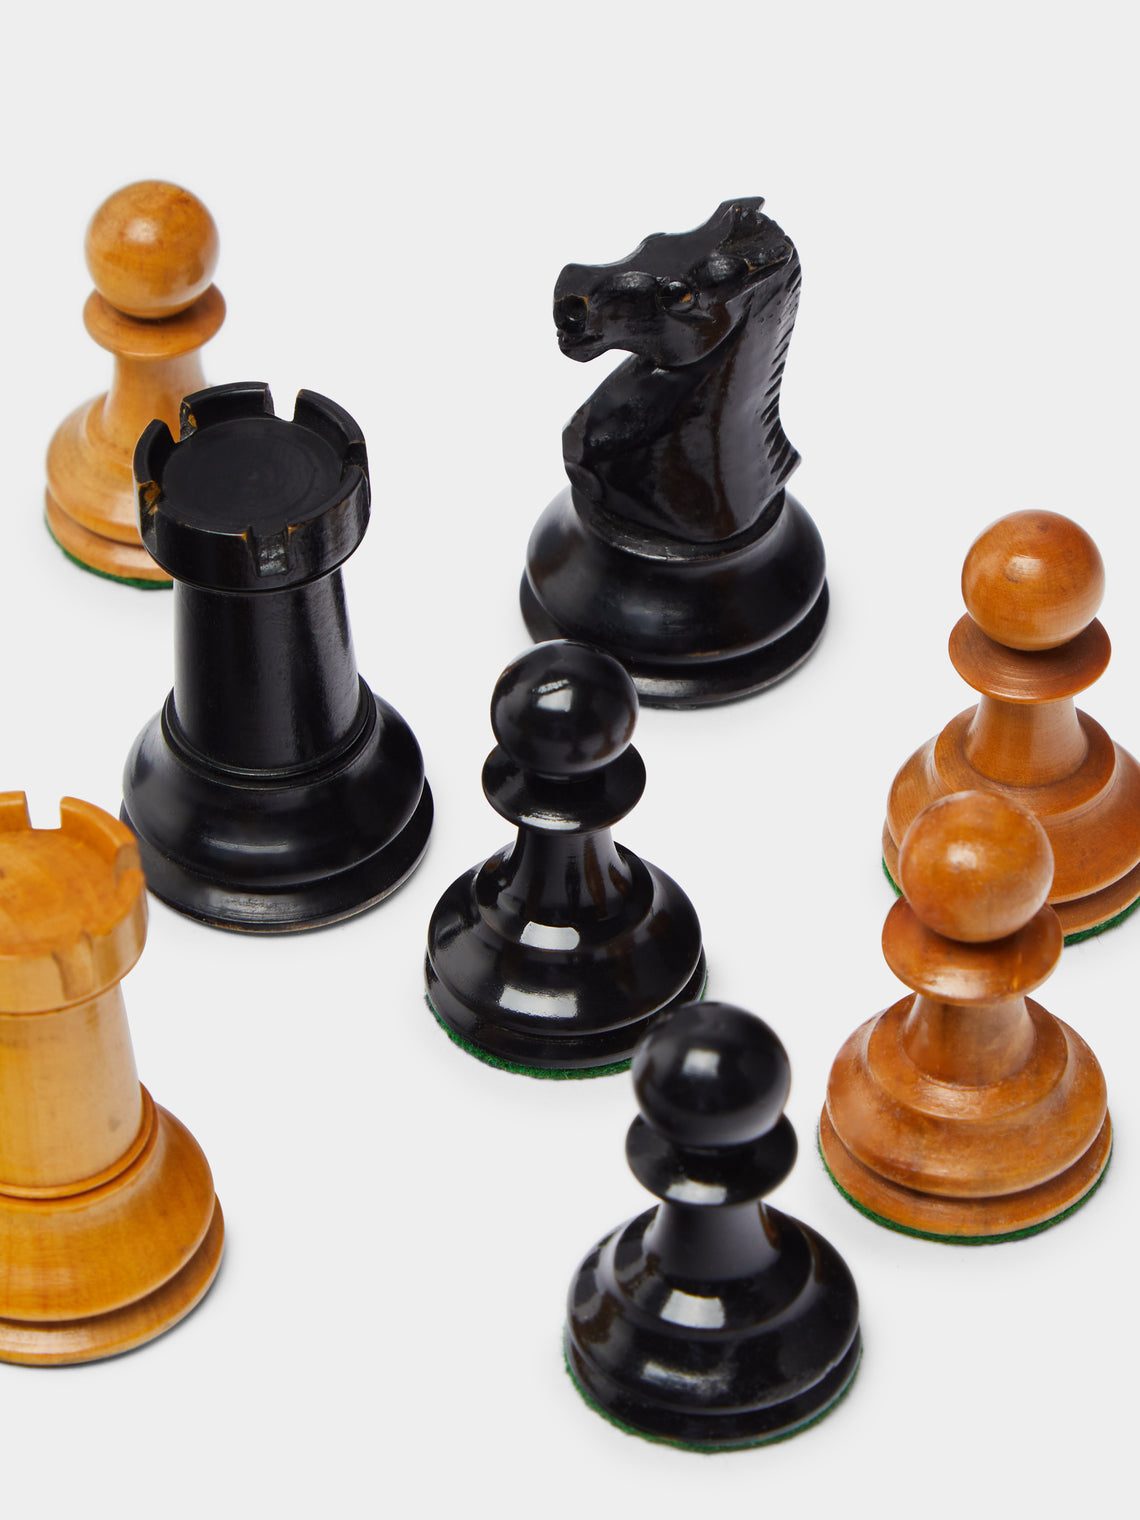 Antique and Vintage - 1950's Chess Set - ABASK